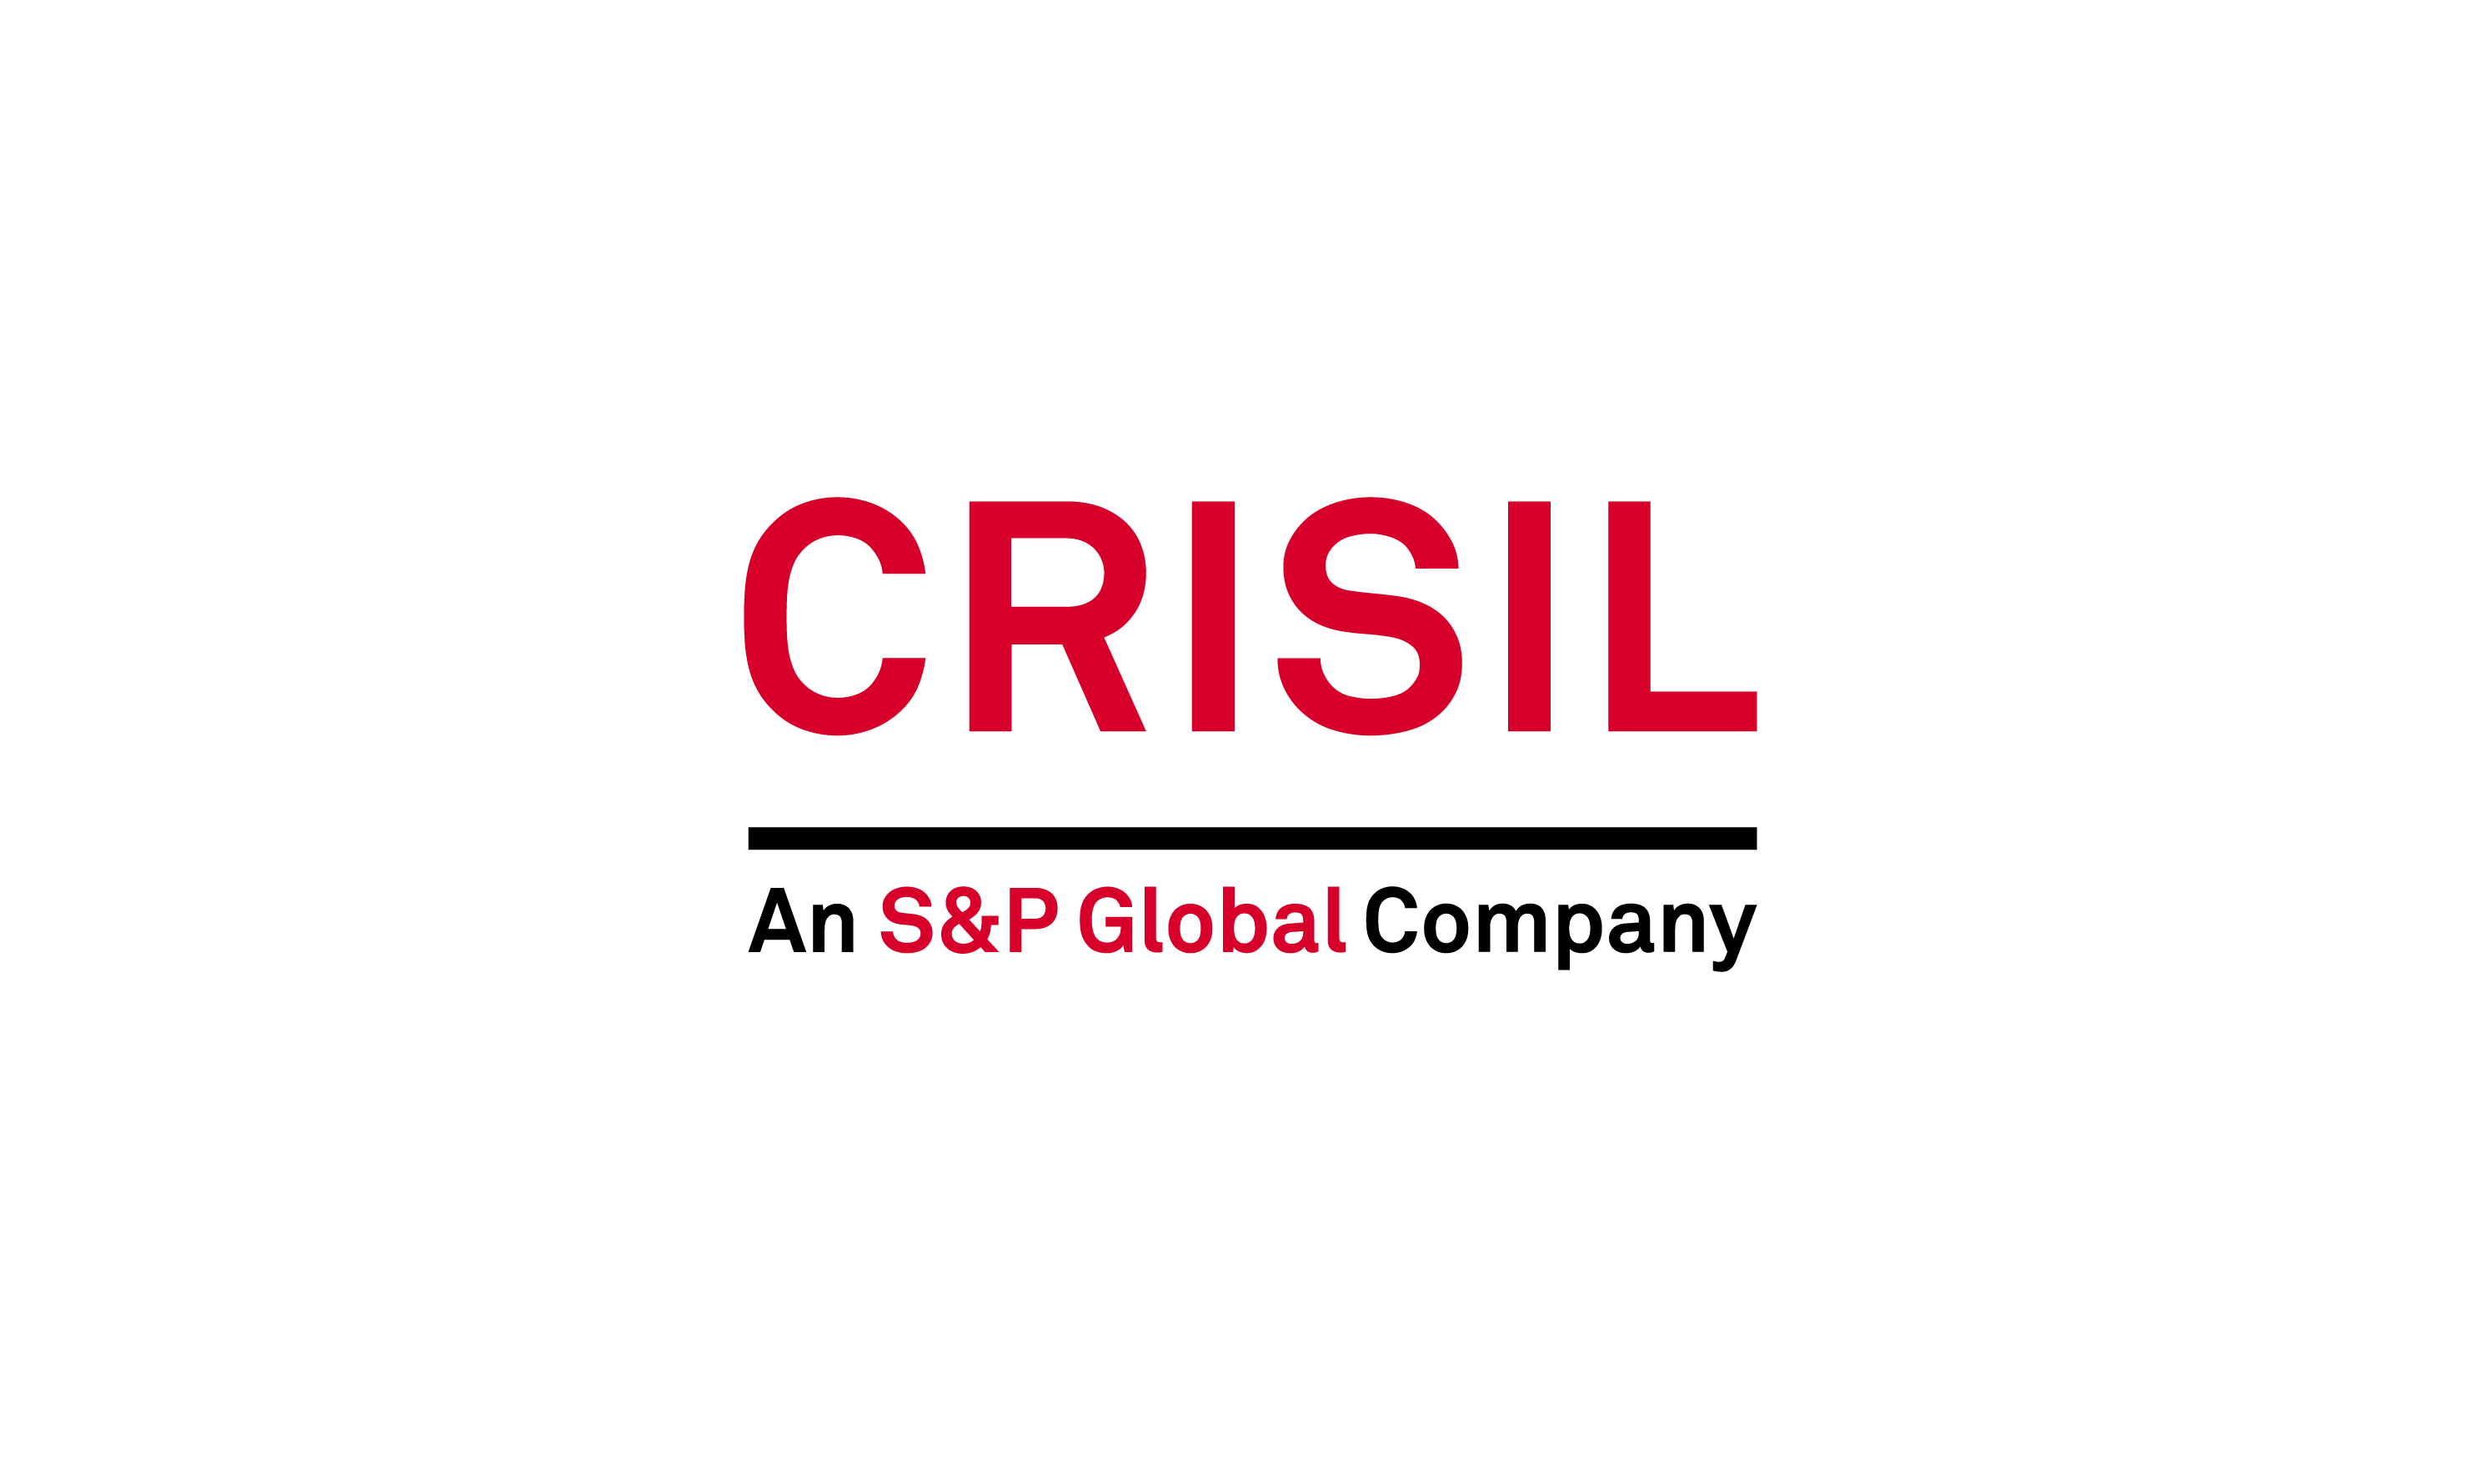 CRISIL Recruitment For Management Trainee 8 LPA CTC Apply Now Opportunity Track